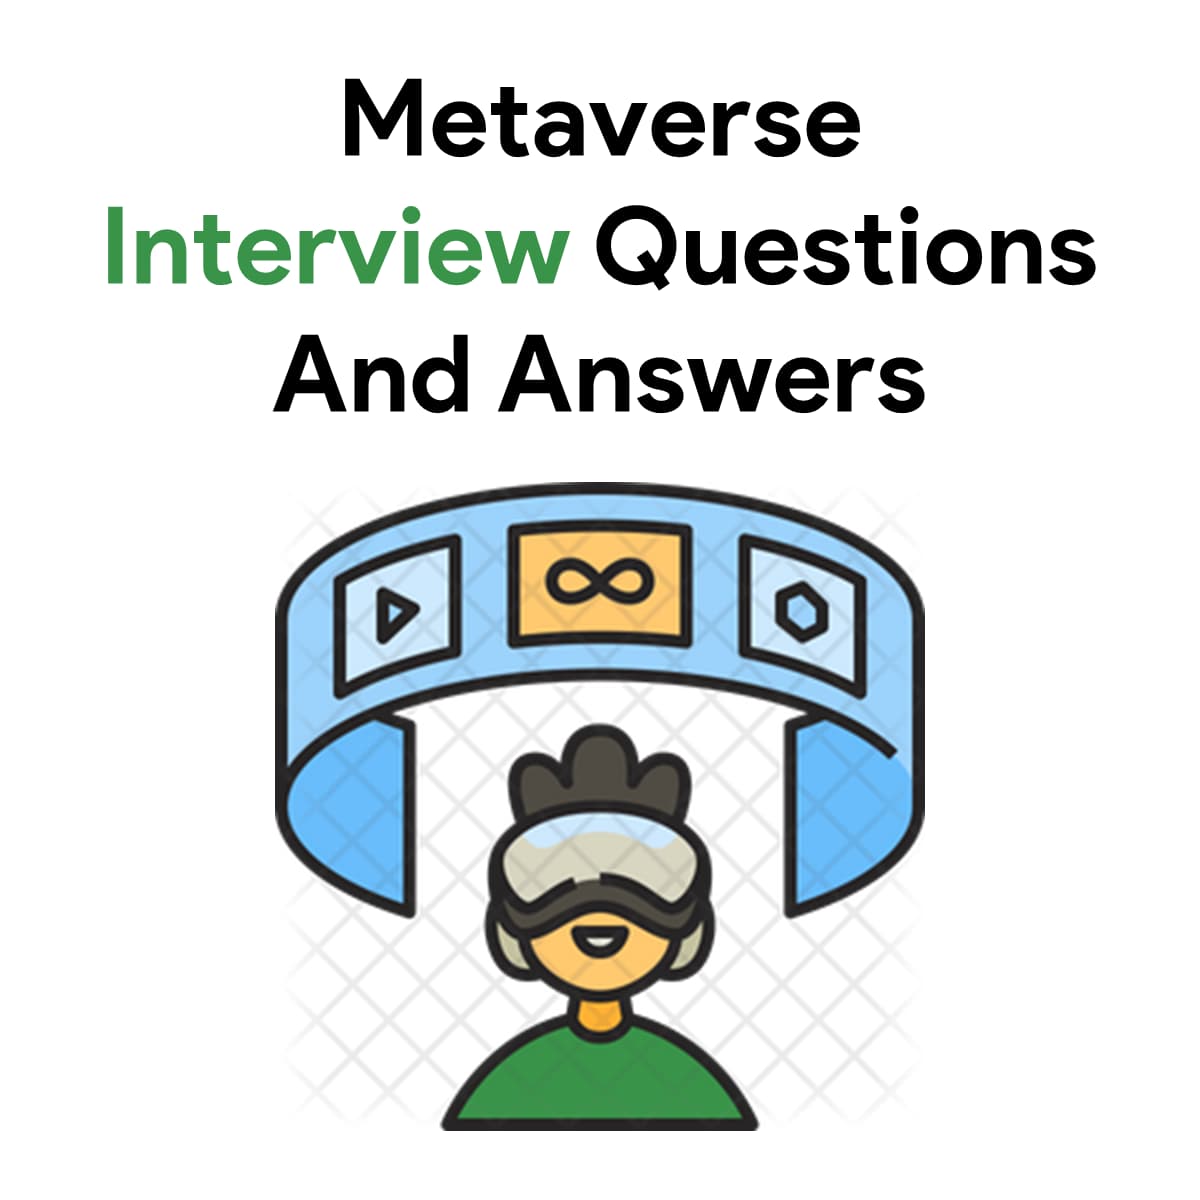 Metaverse Interview Questions And Answers